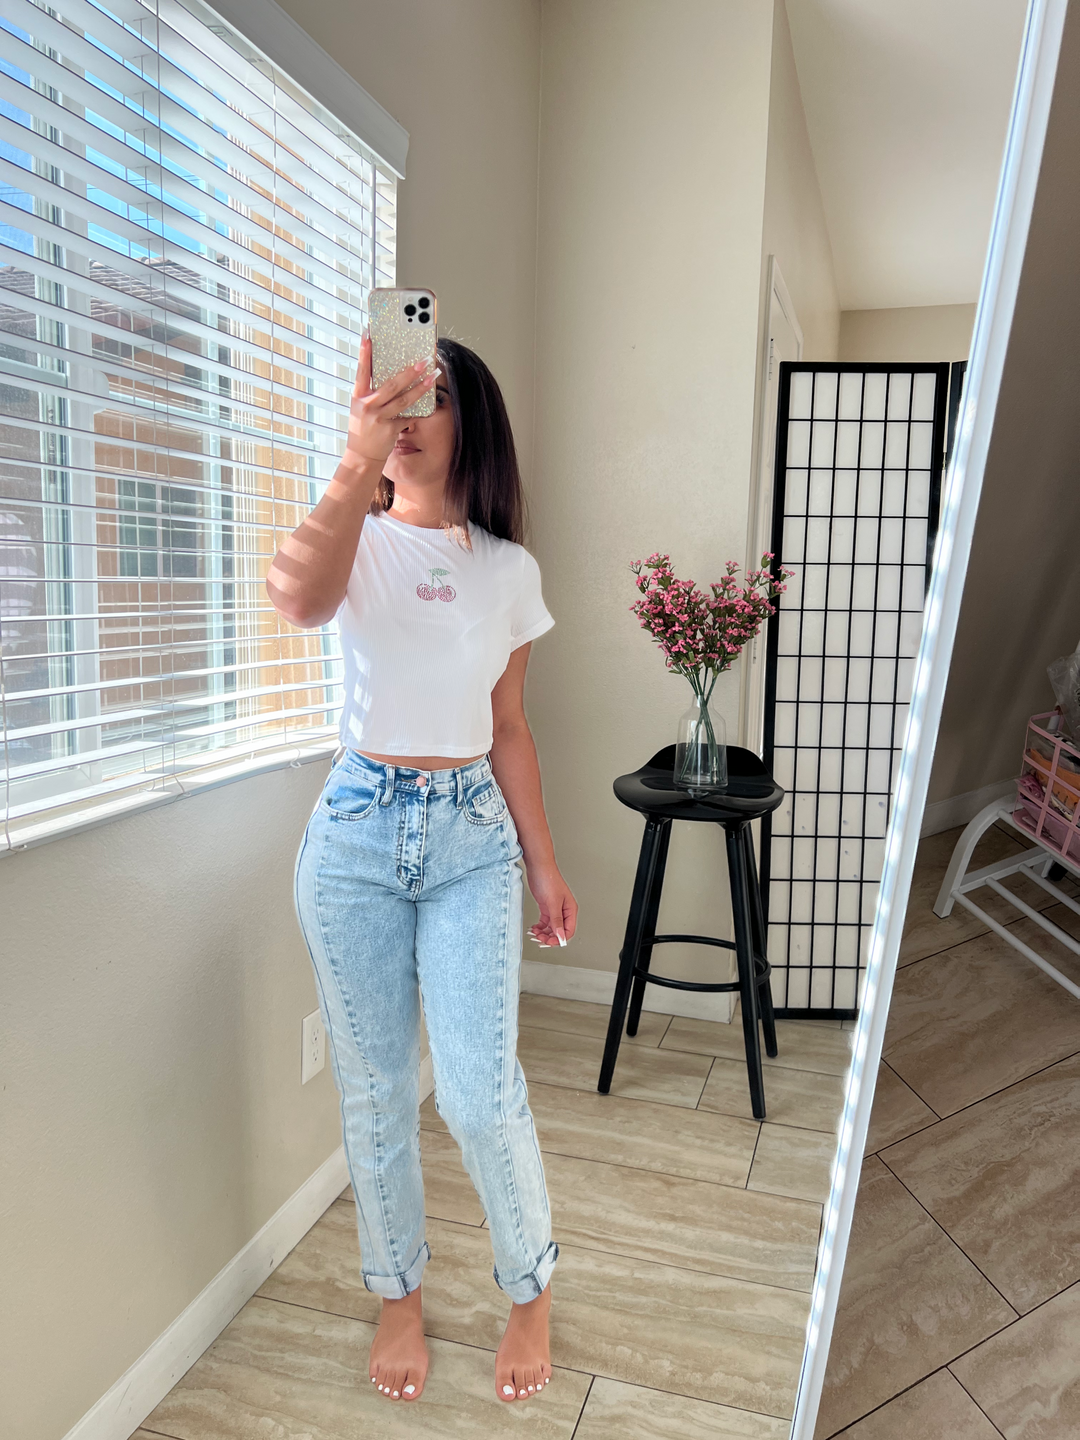 White Cherry Crop Top - Style Baby OMG Fashion Boutique - Stylebabyomg - Buy - Aesthetic Baddie Outfits - Babyboo - OOTD - Shie 